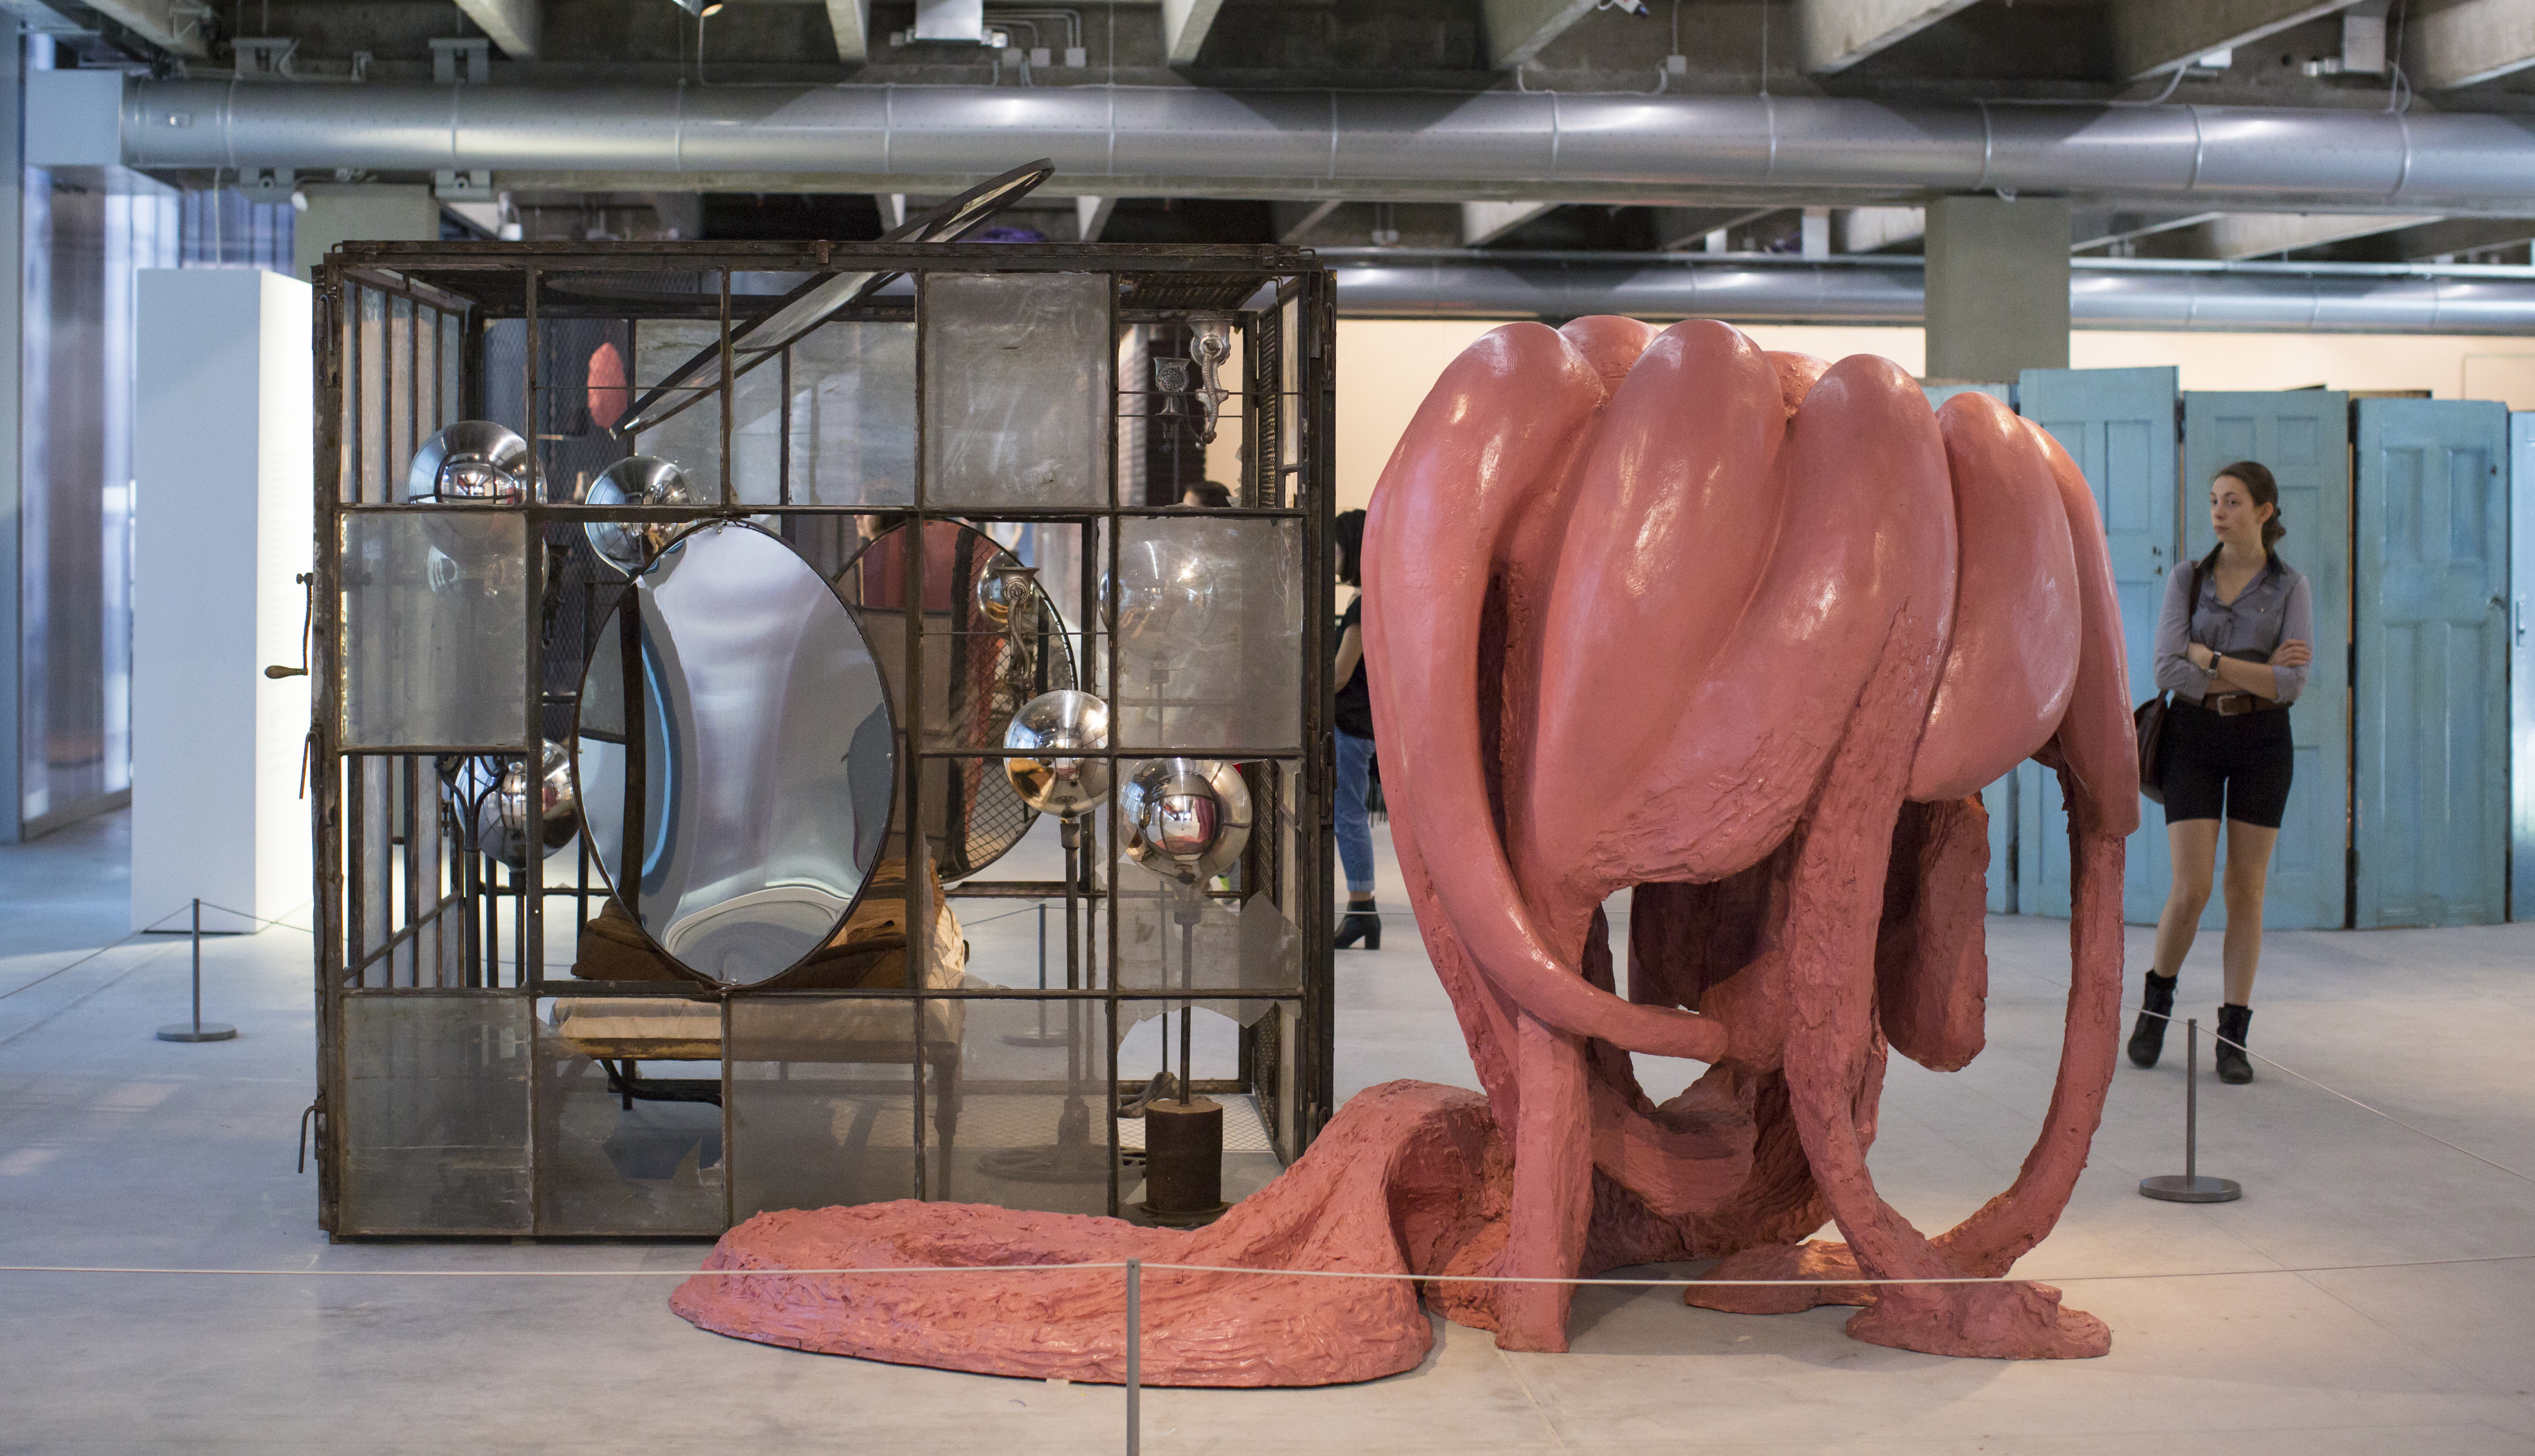 Louise Bourgeois: Life in Sculpture